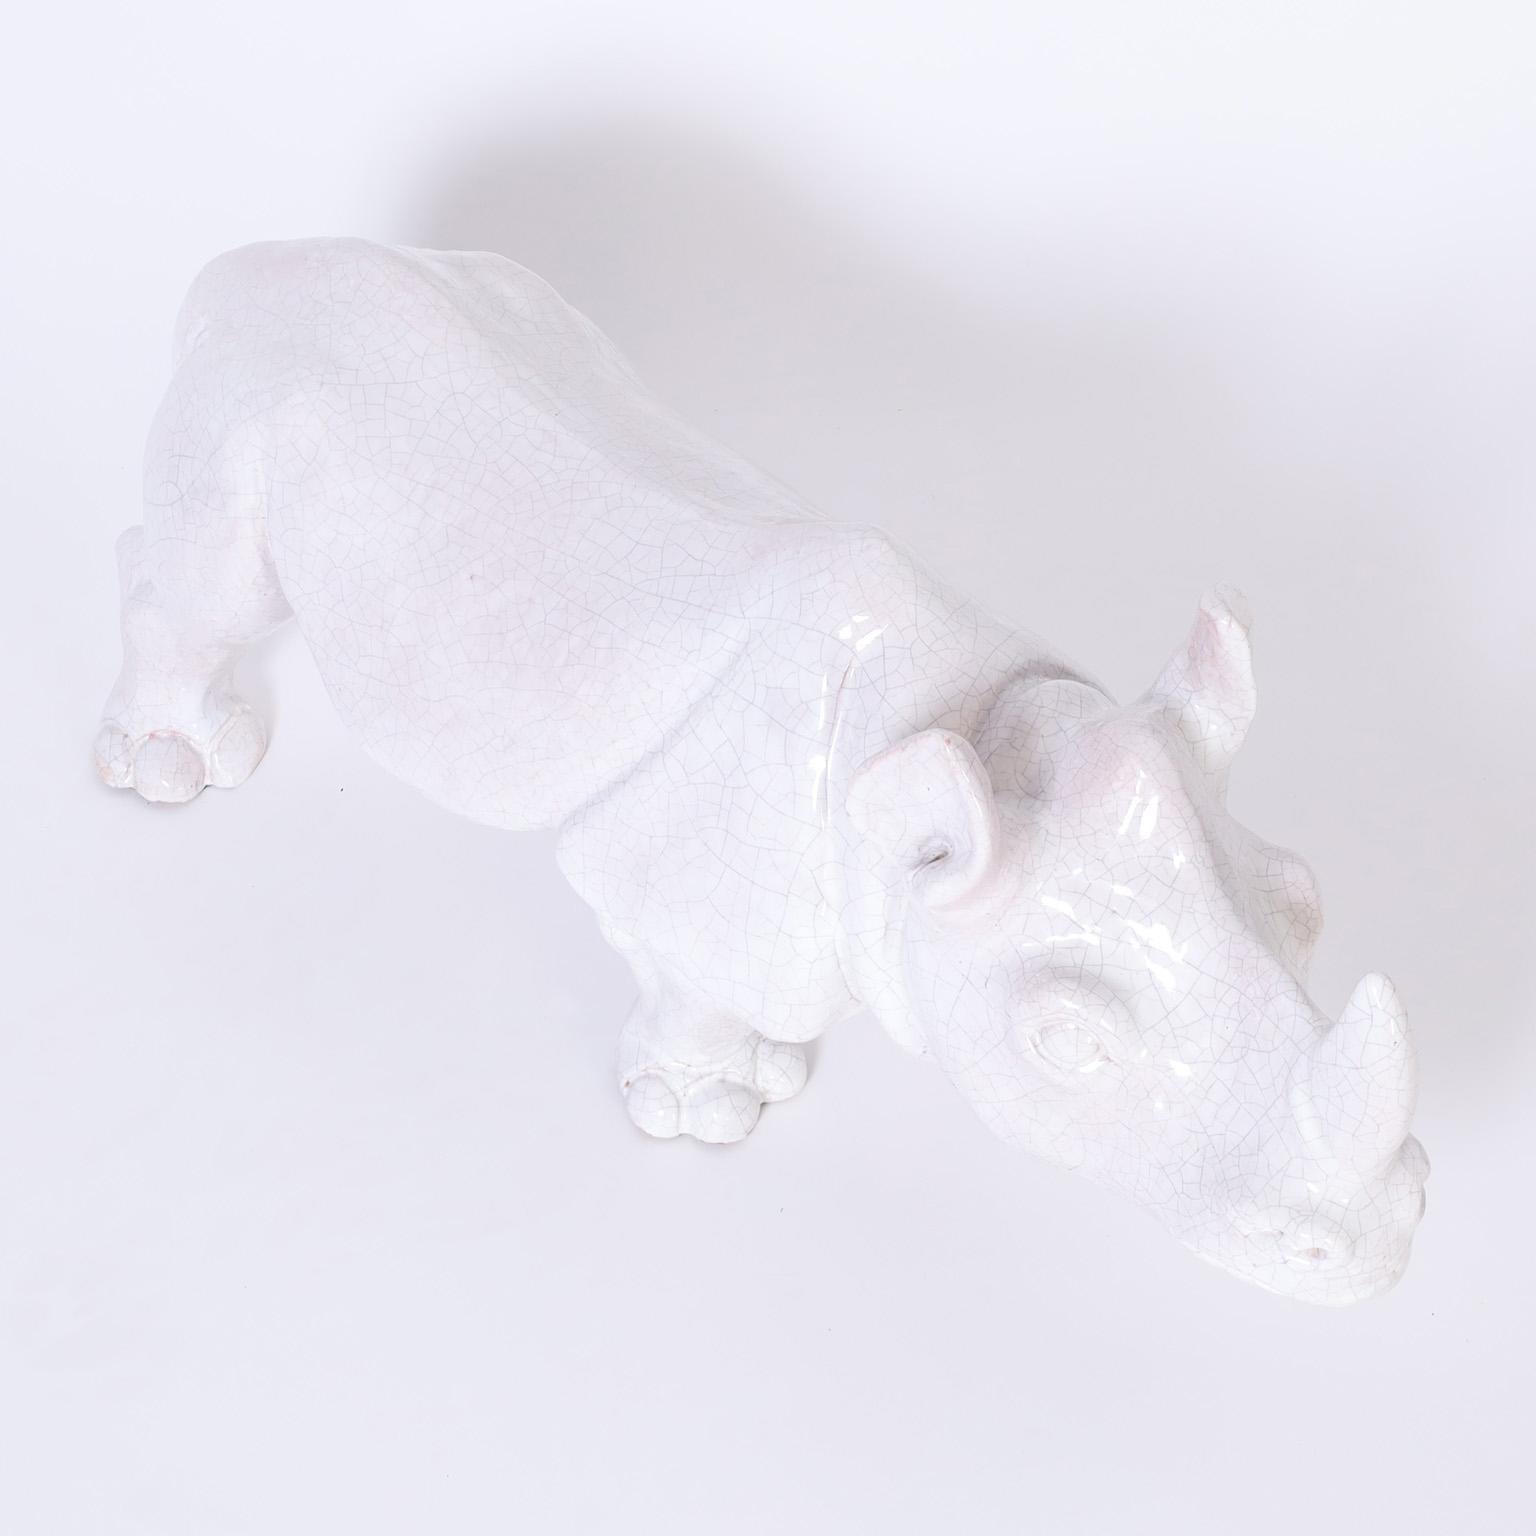 Mid century rhinoceros sculpture crafted in terra cotta with a white crackle glaze.